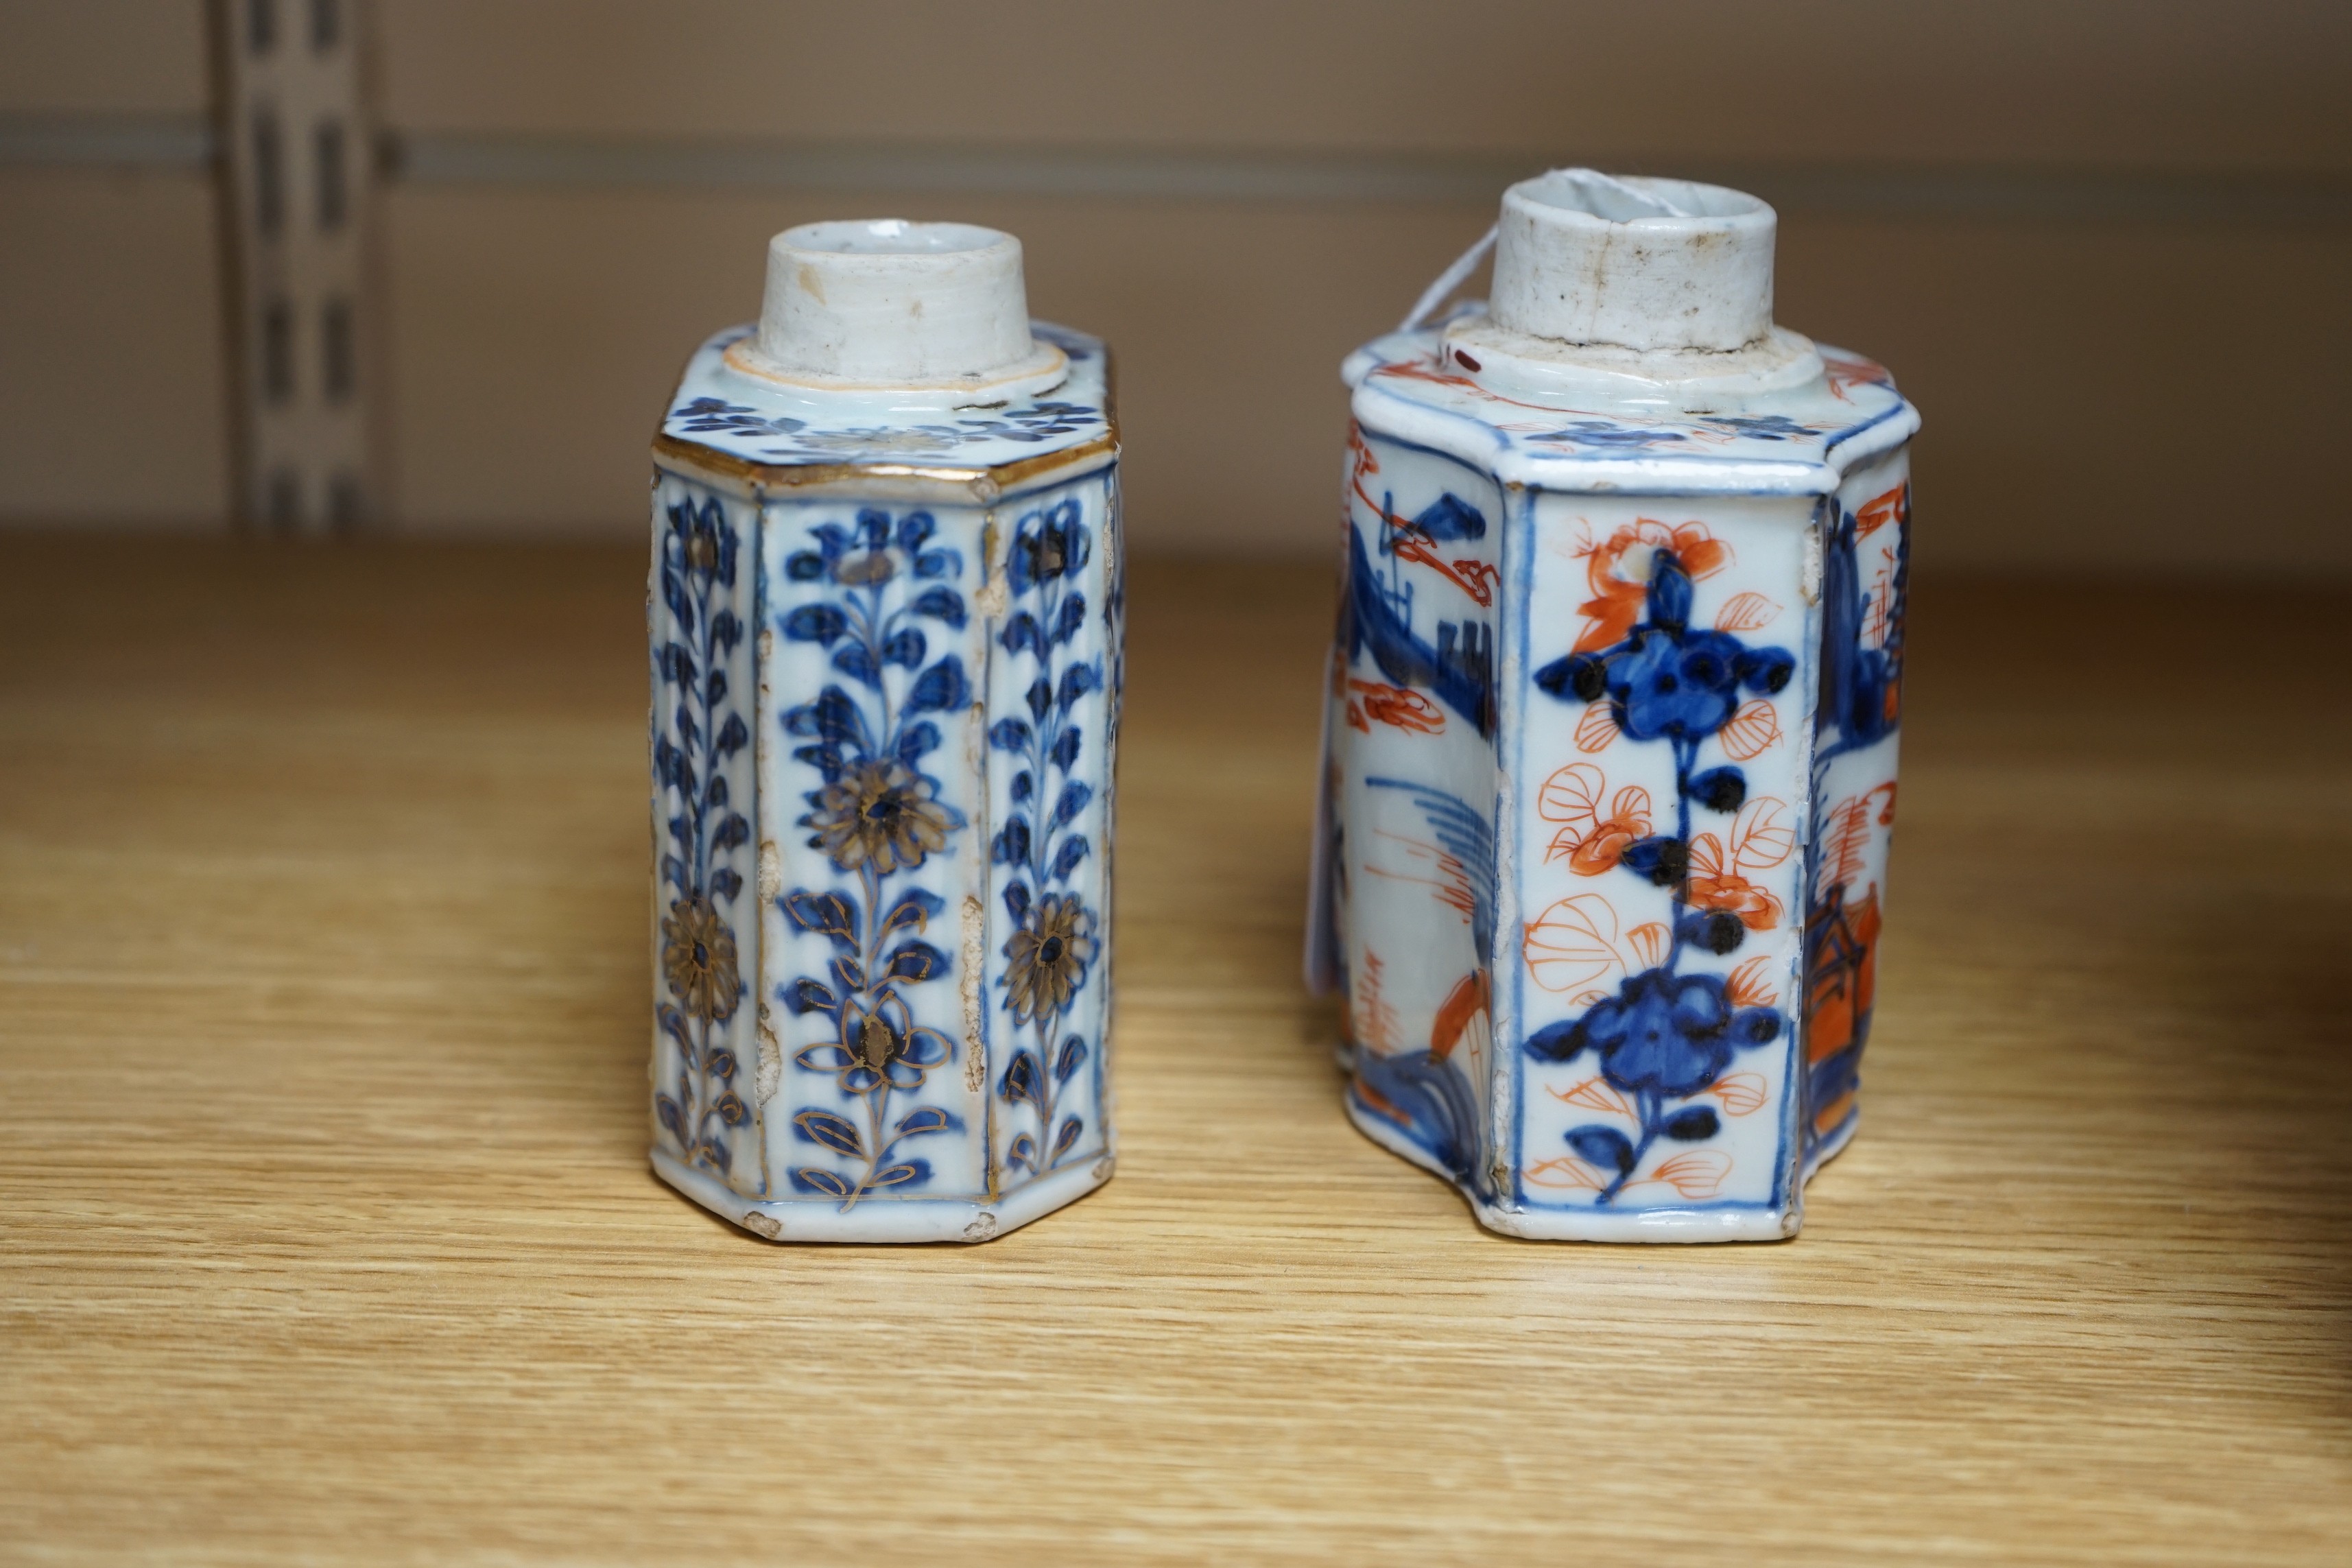 Two 18th century Chinese export porcelain tea cannisters, 10 cms high